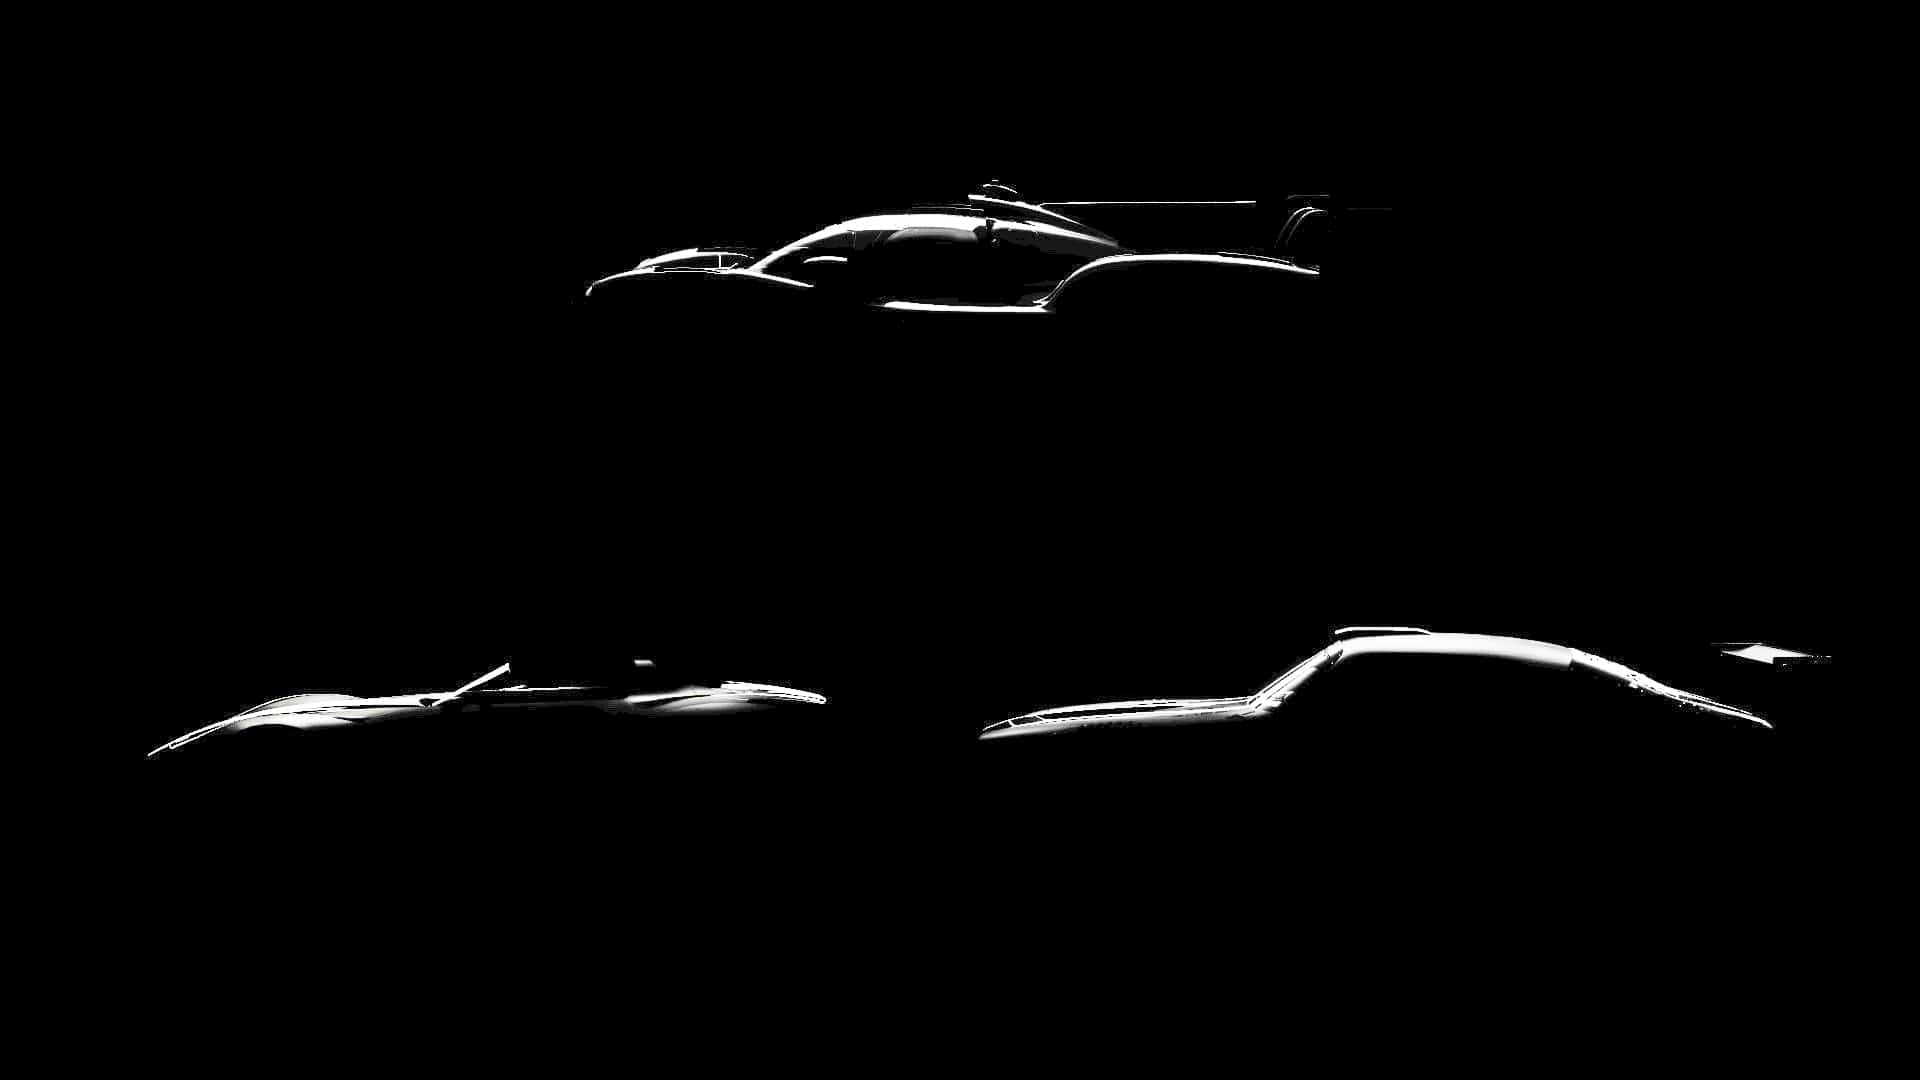 Here are the three new cars coming to Gran Turismo 7 in May